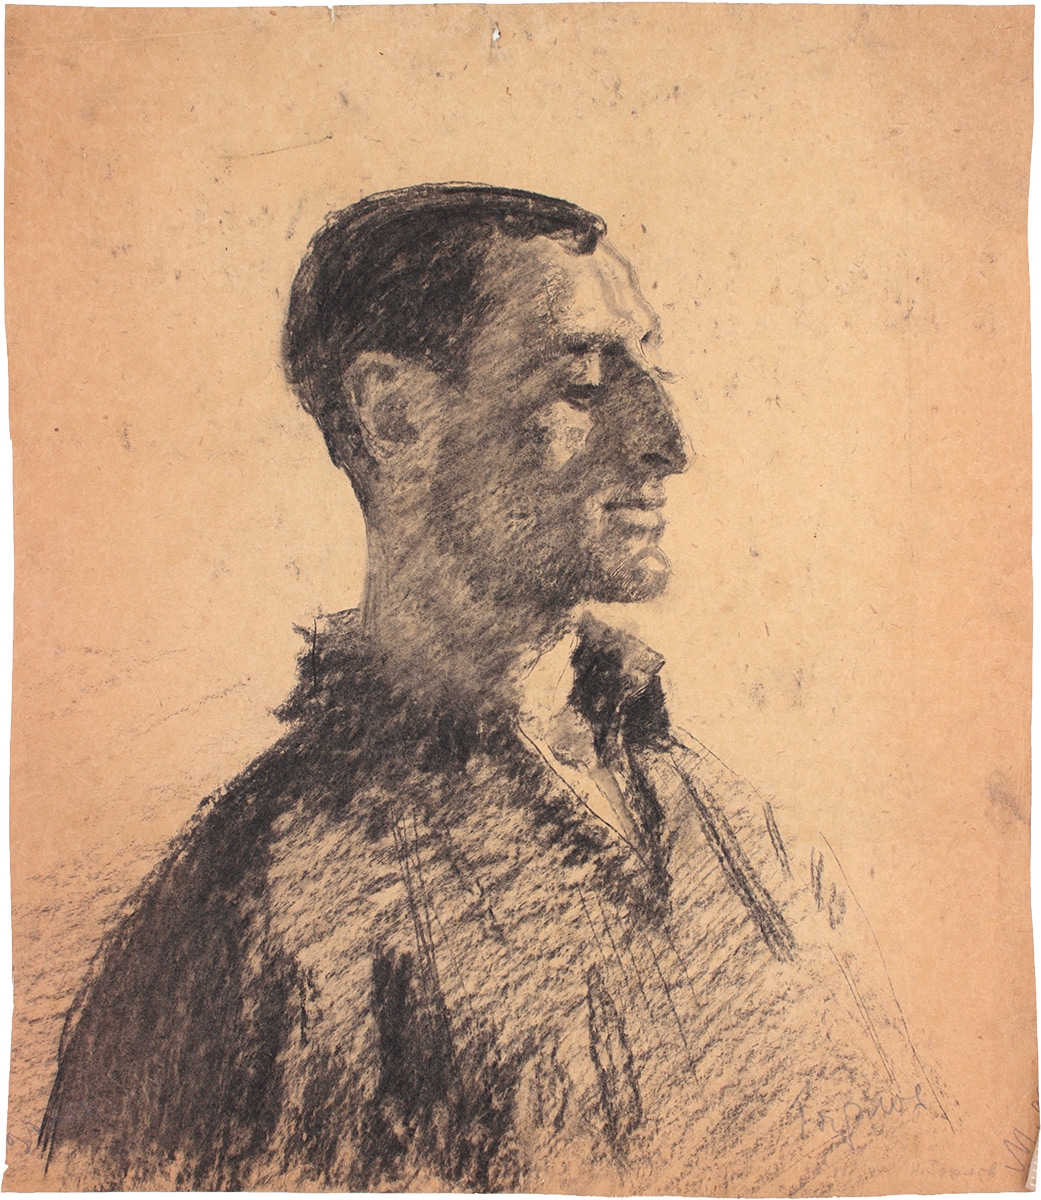 Artwork by Nicolaï Gorlov, Portrait of a man, Made of charcoal on Paper